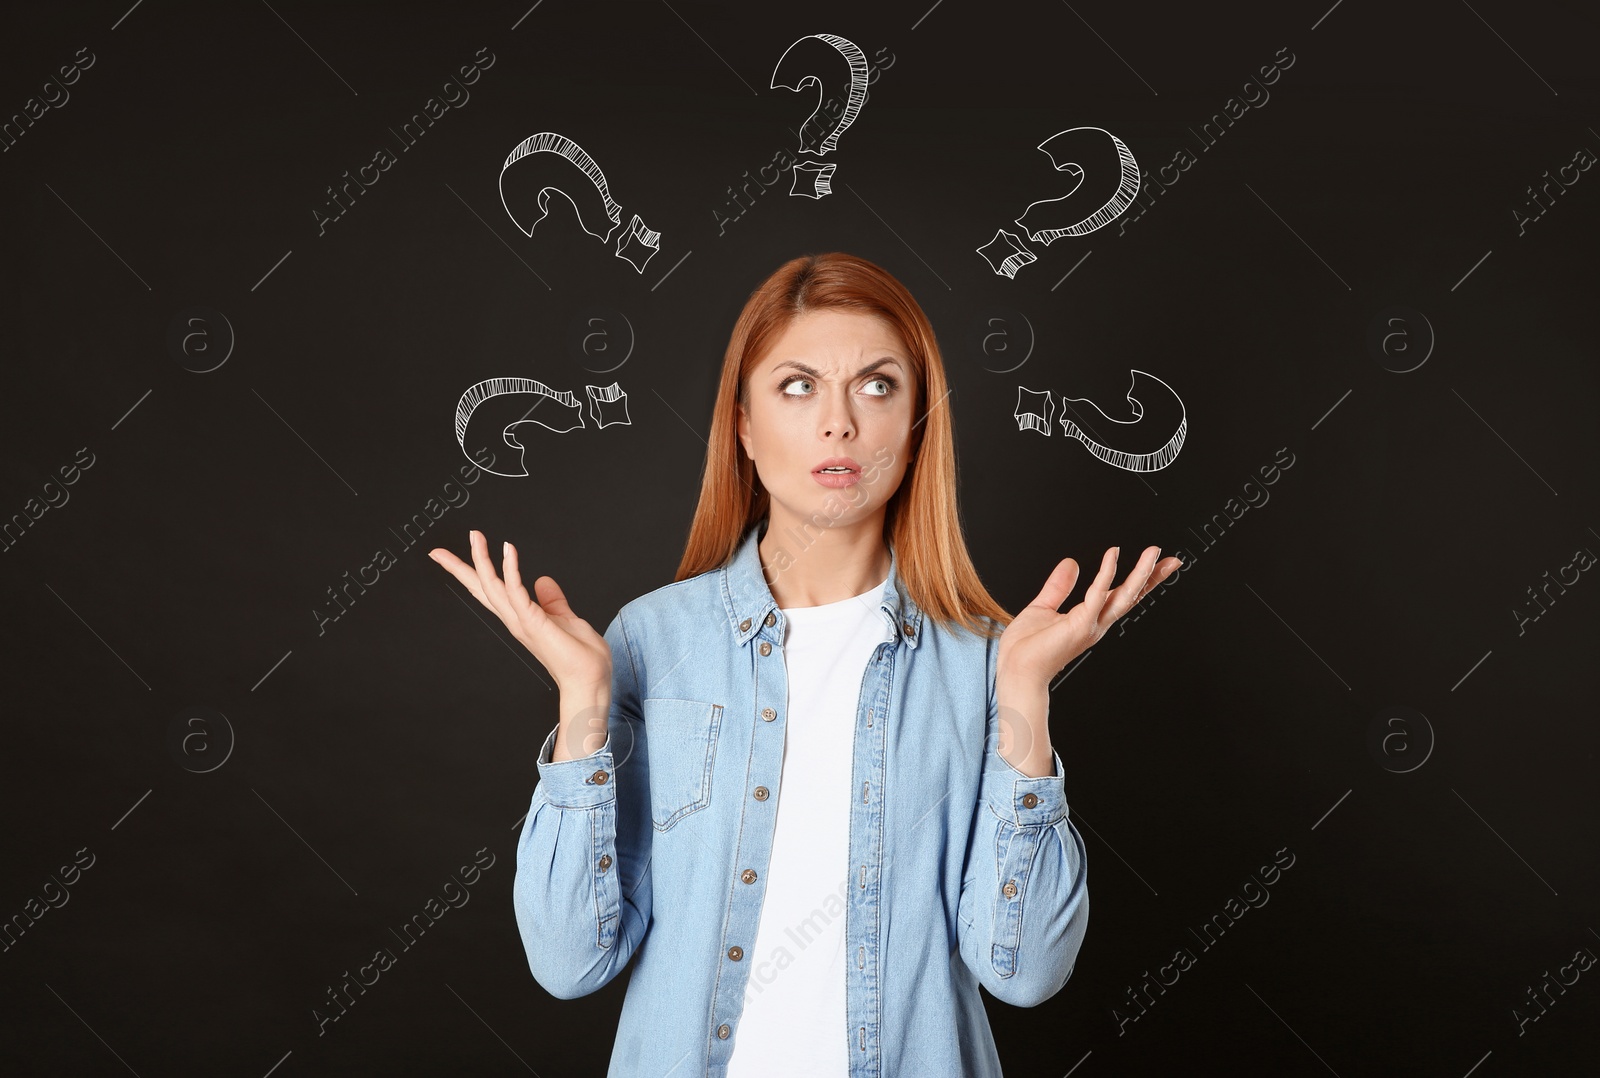 Image of Choice in profession or other areas of life, concept. Making decision, thoughtful woman surrounded by drawn question marks on black background